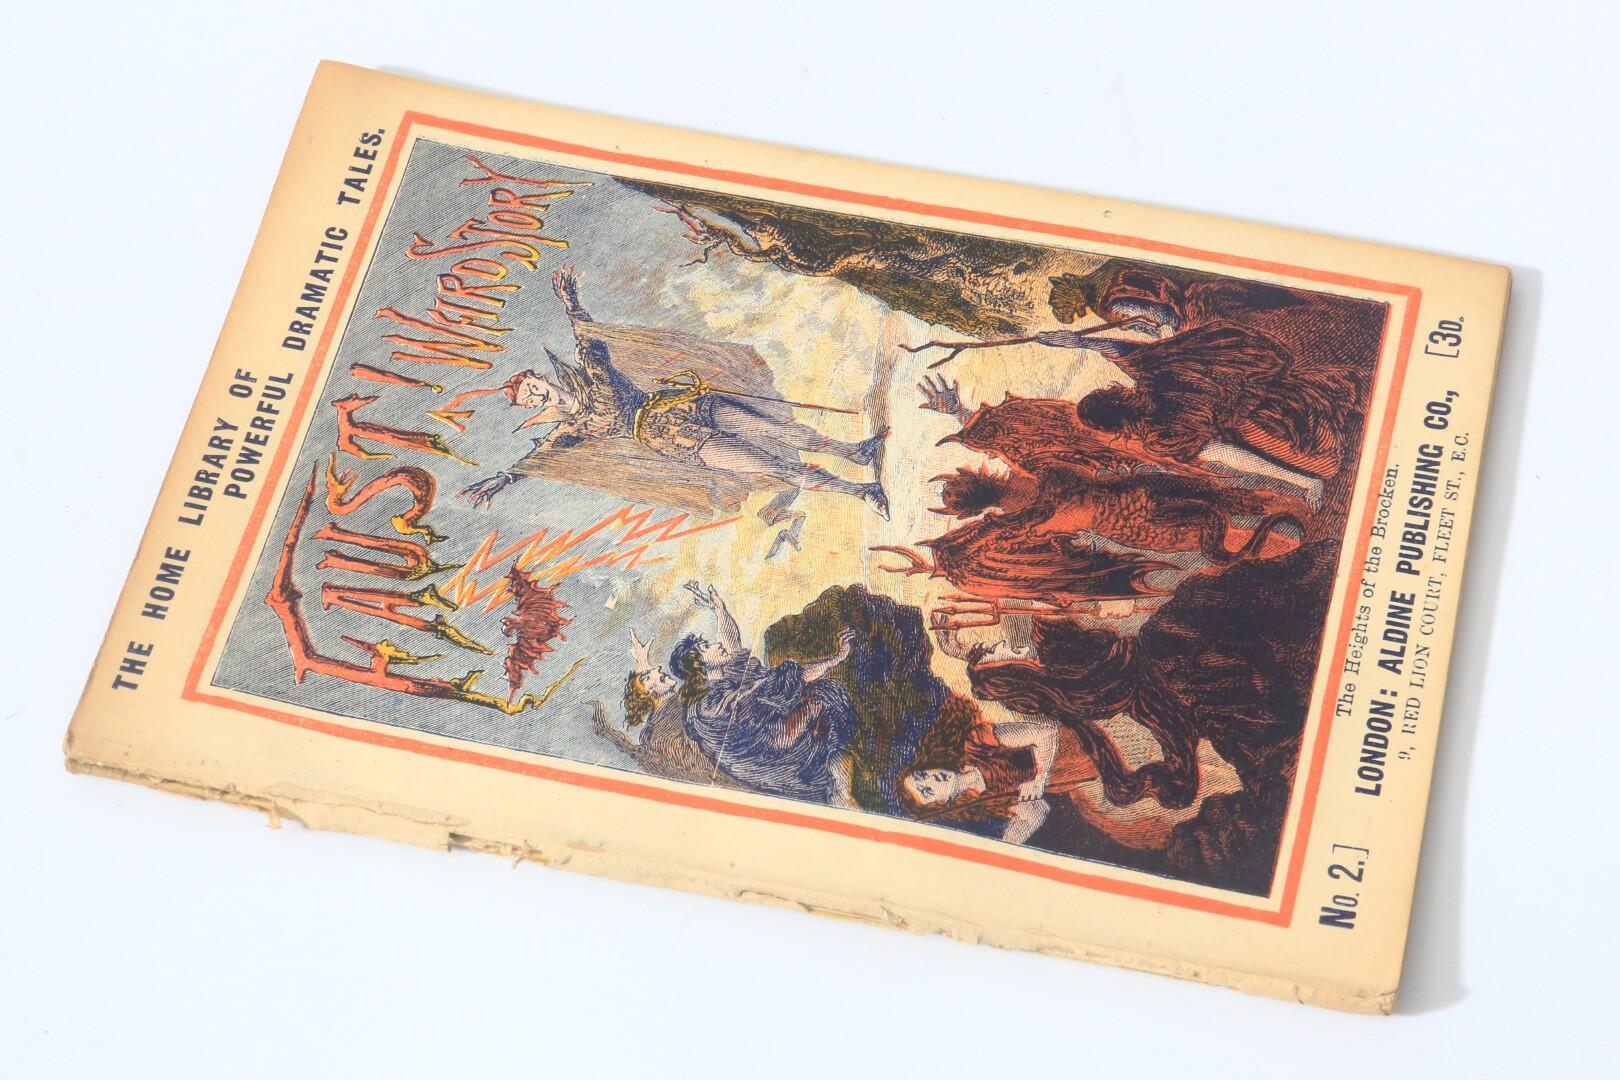 Alfred R. Phillips - Faust: A Weird Story - Aldine Publishing, nd [c1890], First Edition.